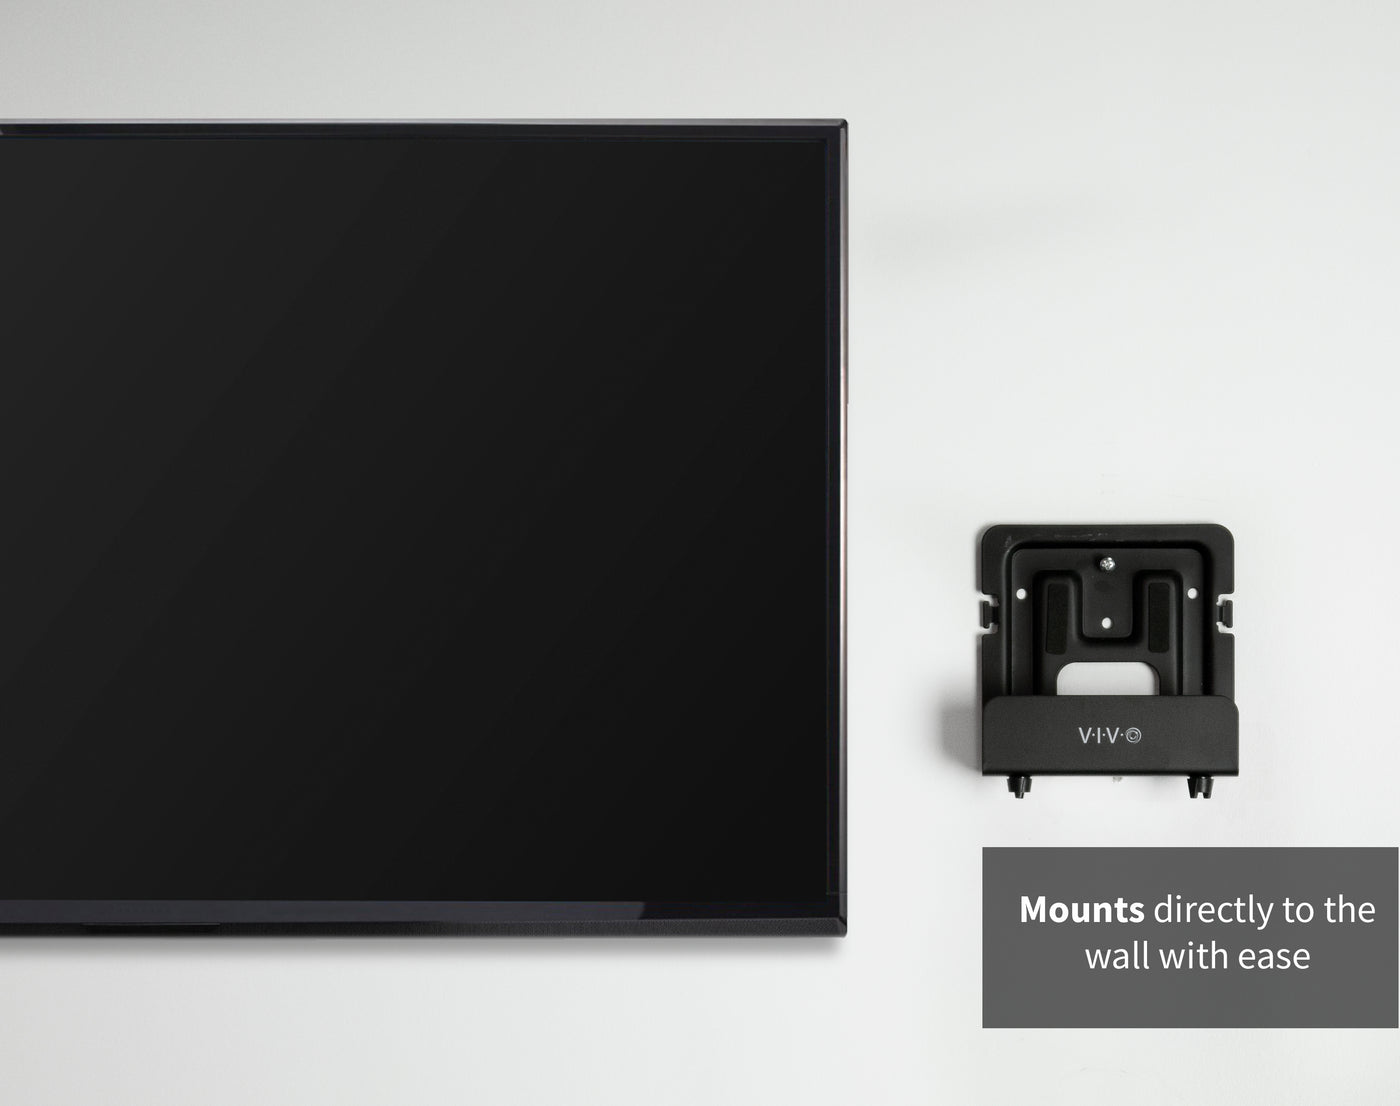 Easy mounting directly to the wall with a low-profile build.